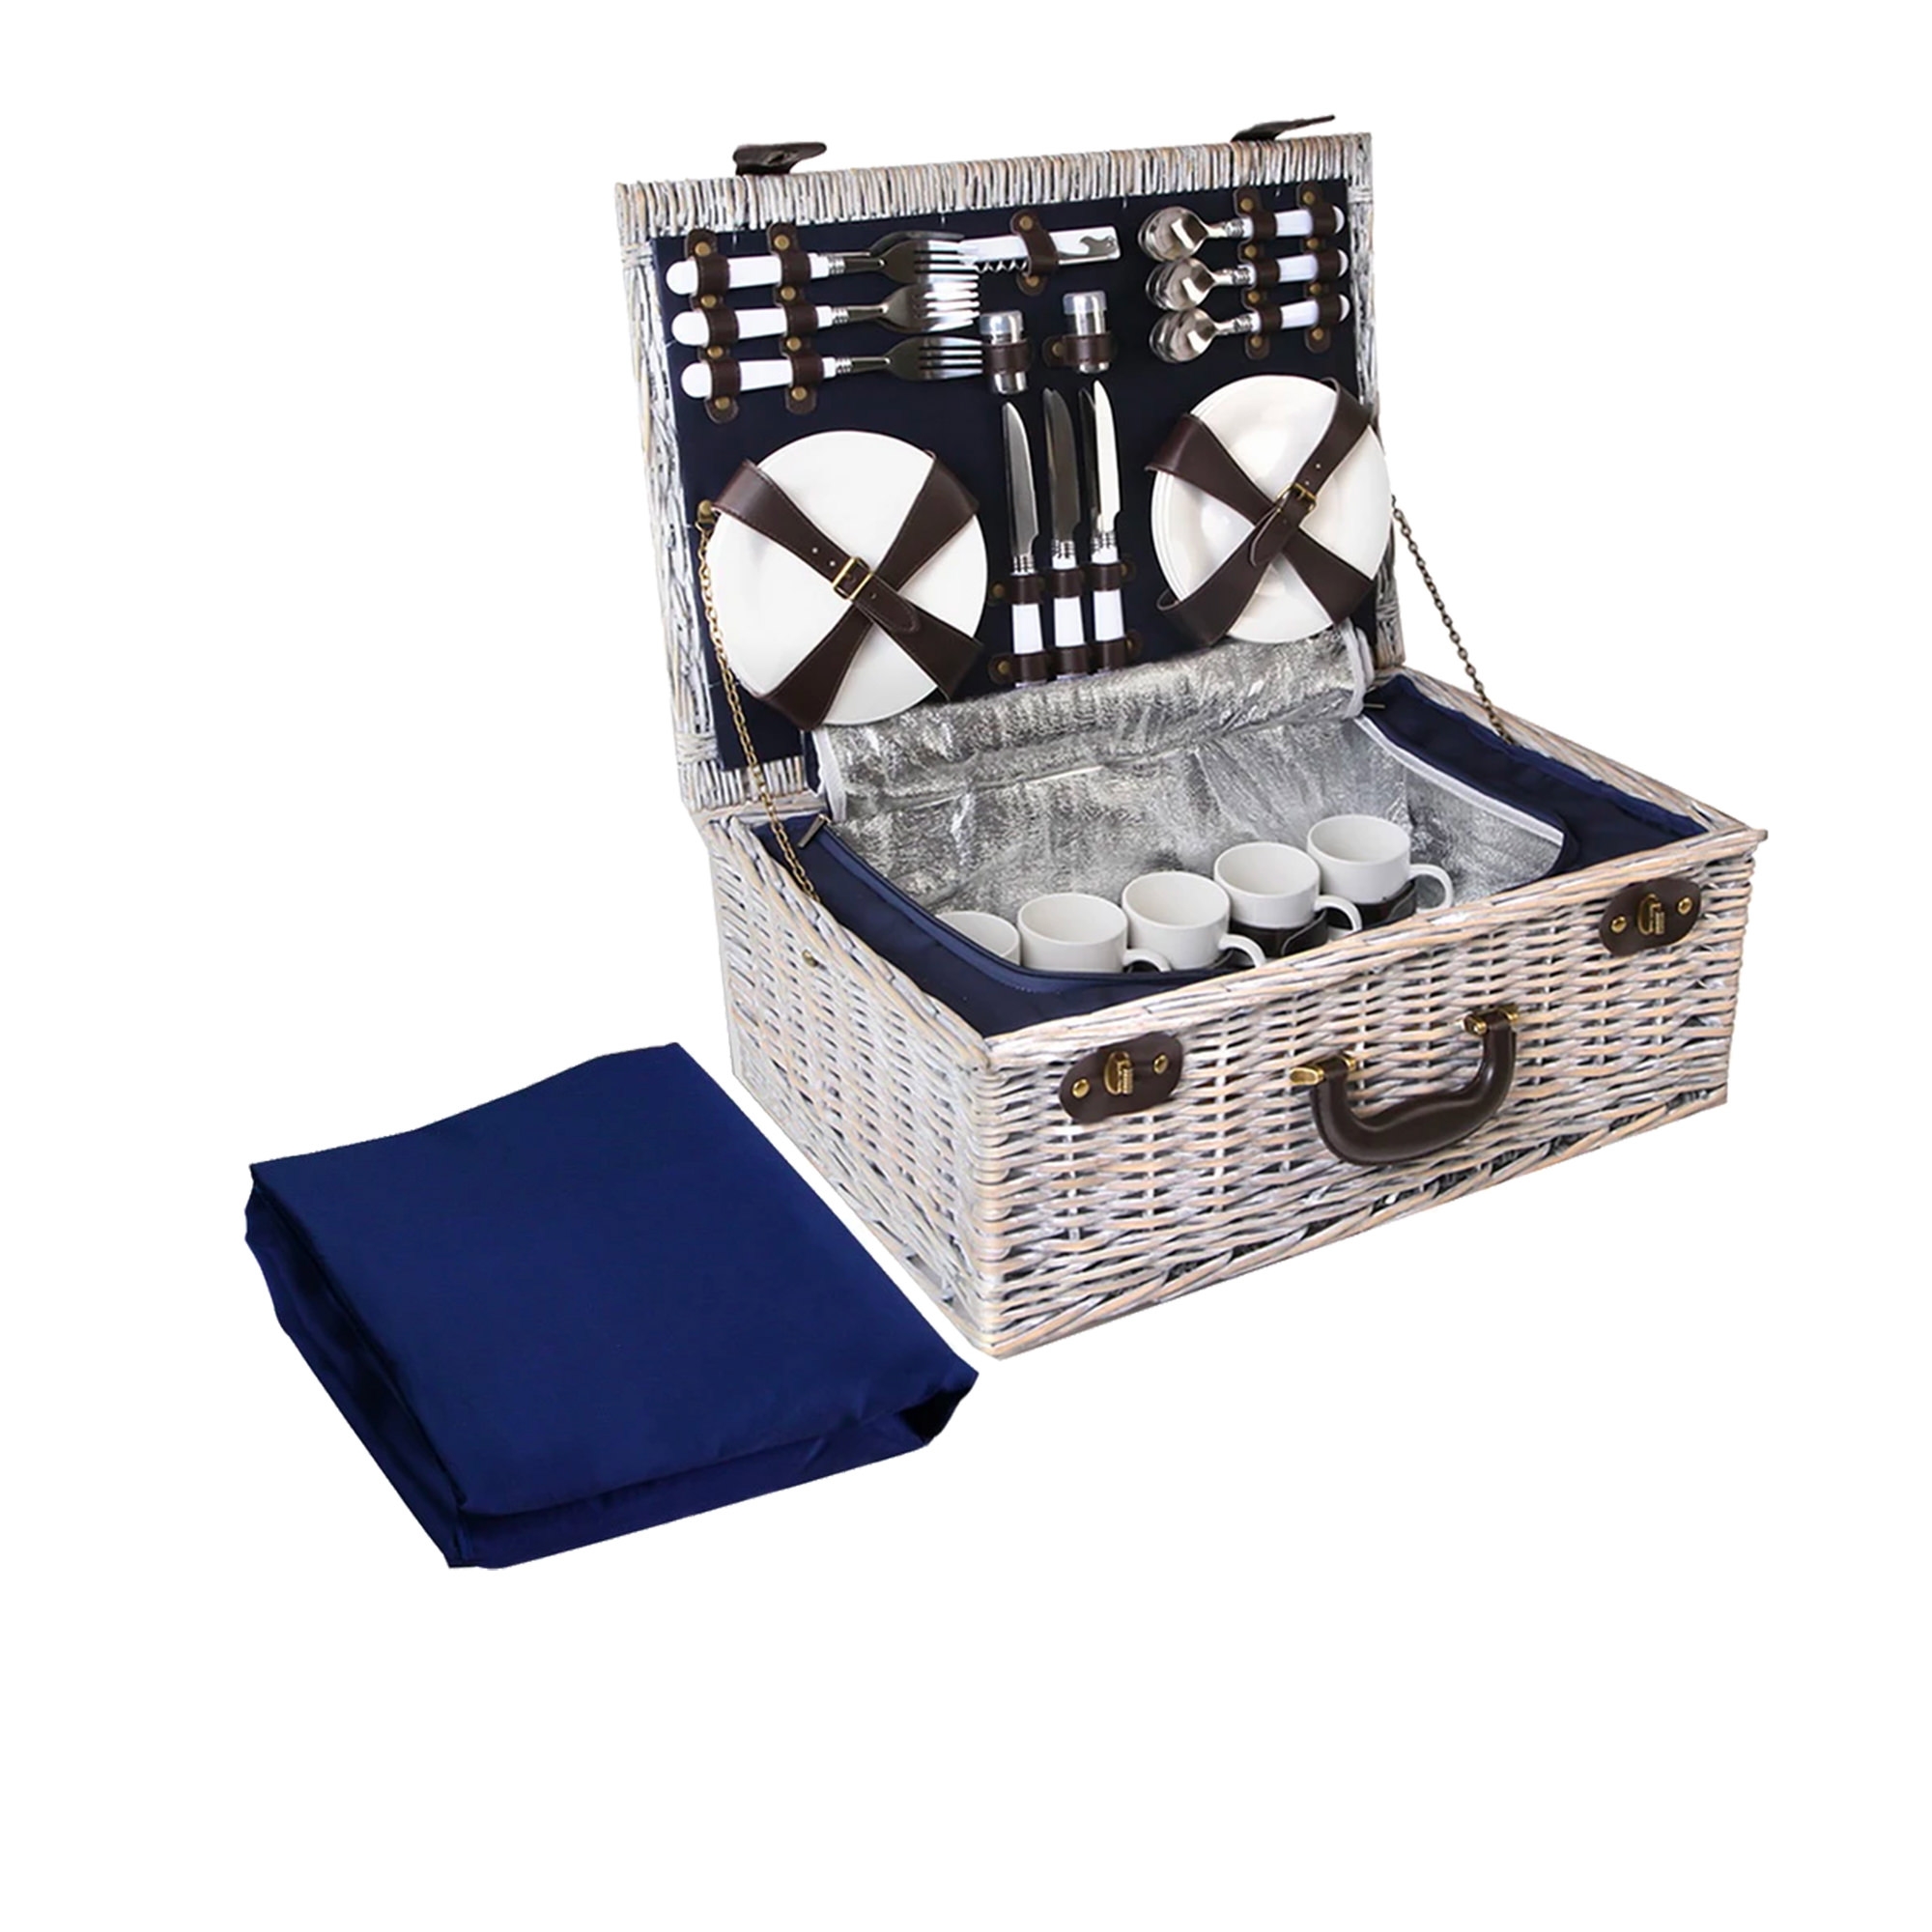 Alfresco 6 Person Insulated Picnic Basket with Navy Blue Blanket Image 1